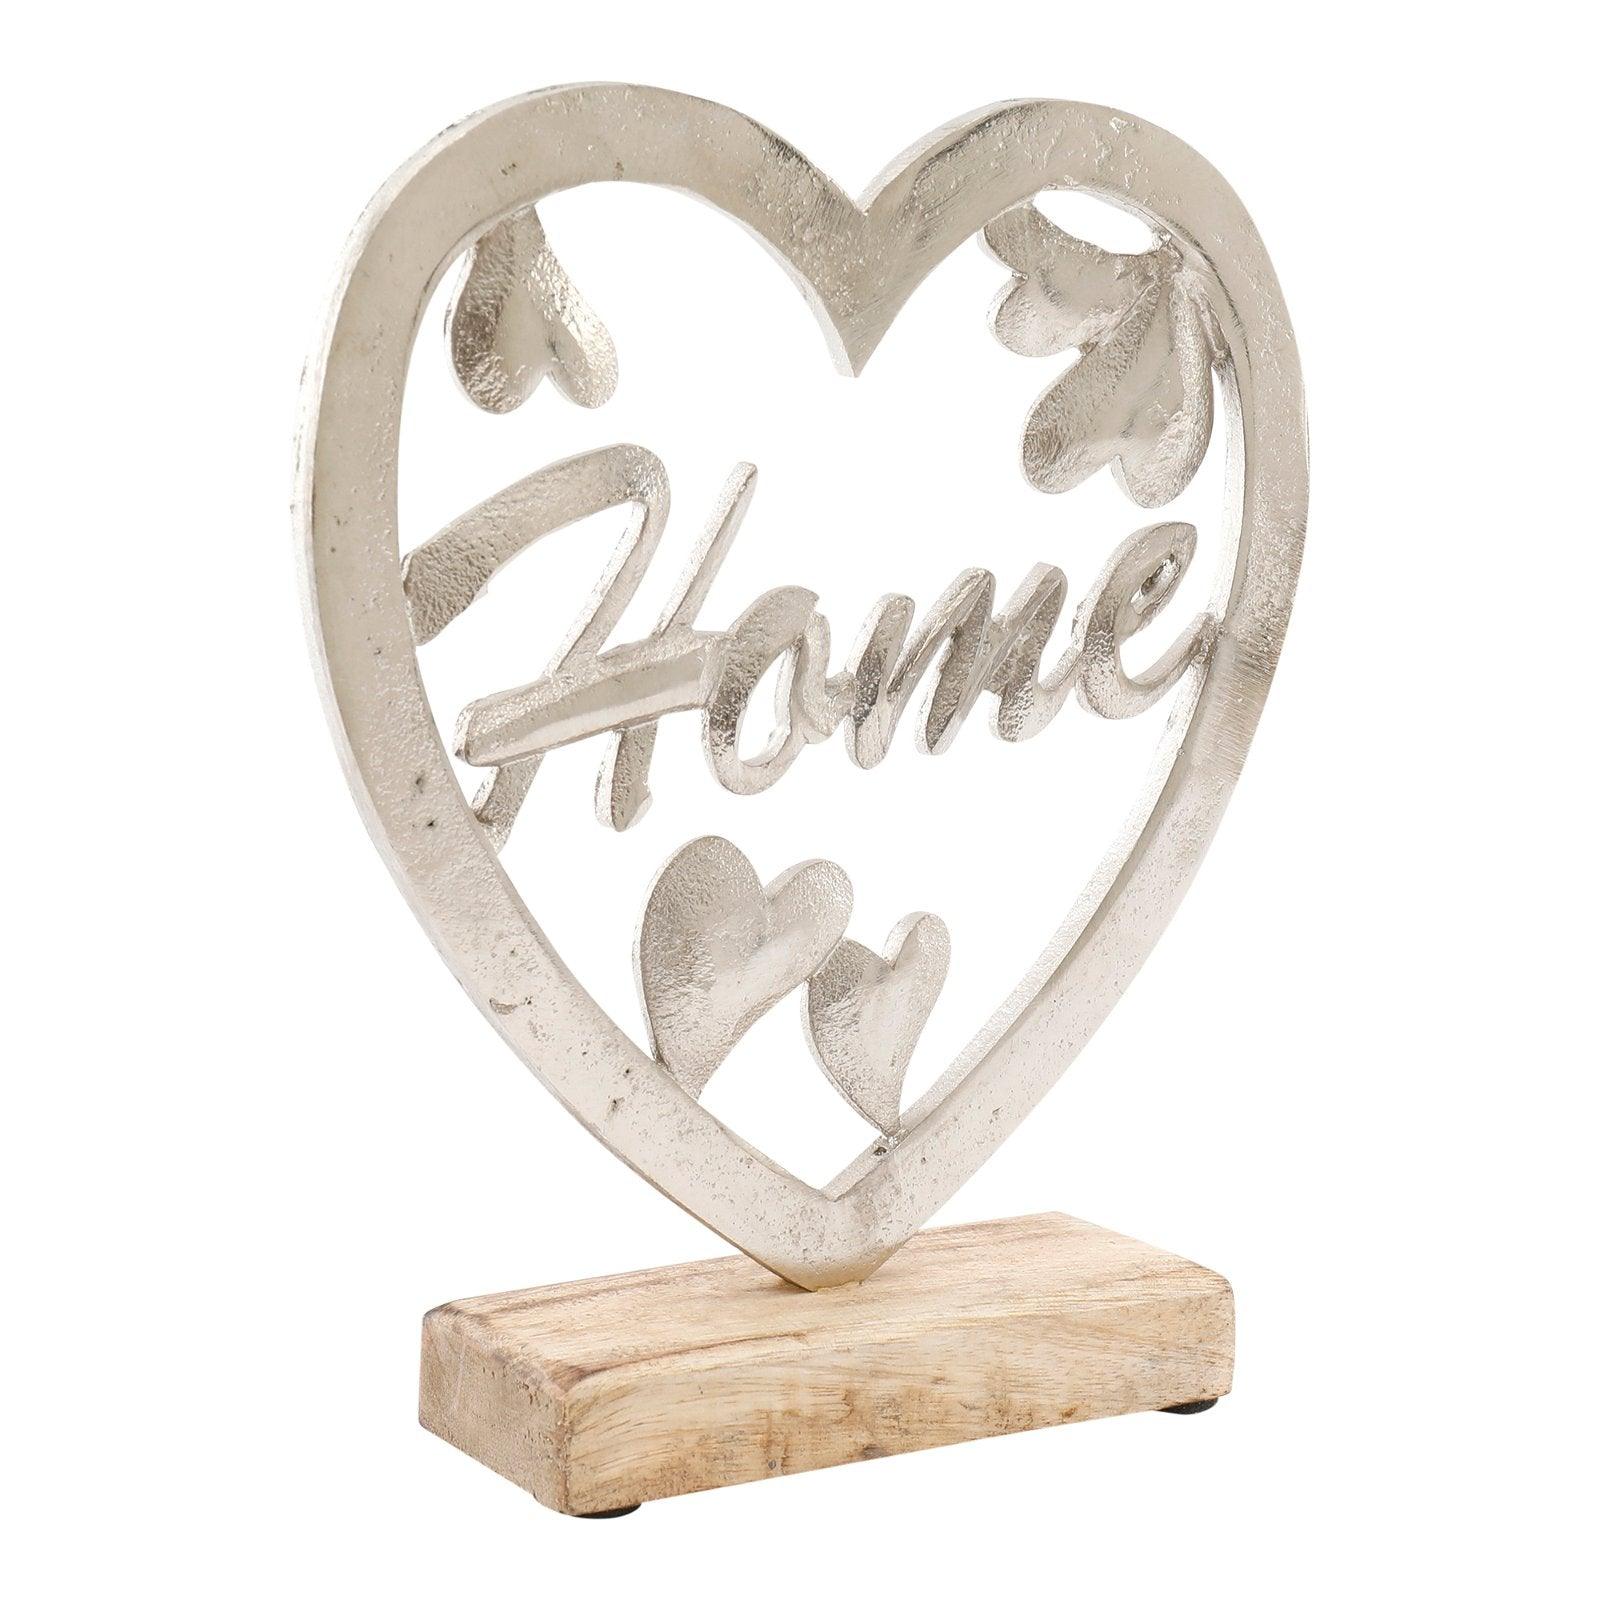 Silver Heart on Wooden Base 17cm - £15.99 - Ornaments 